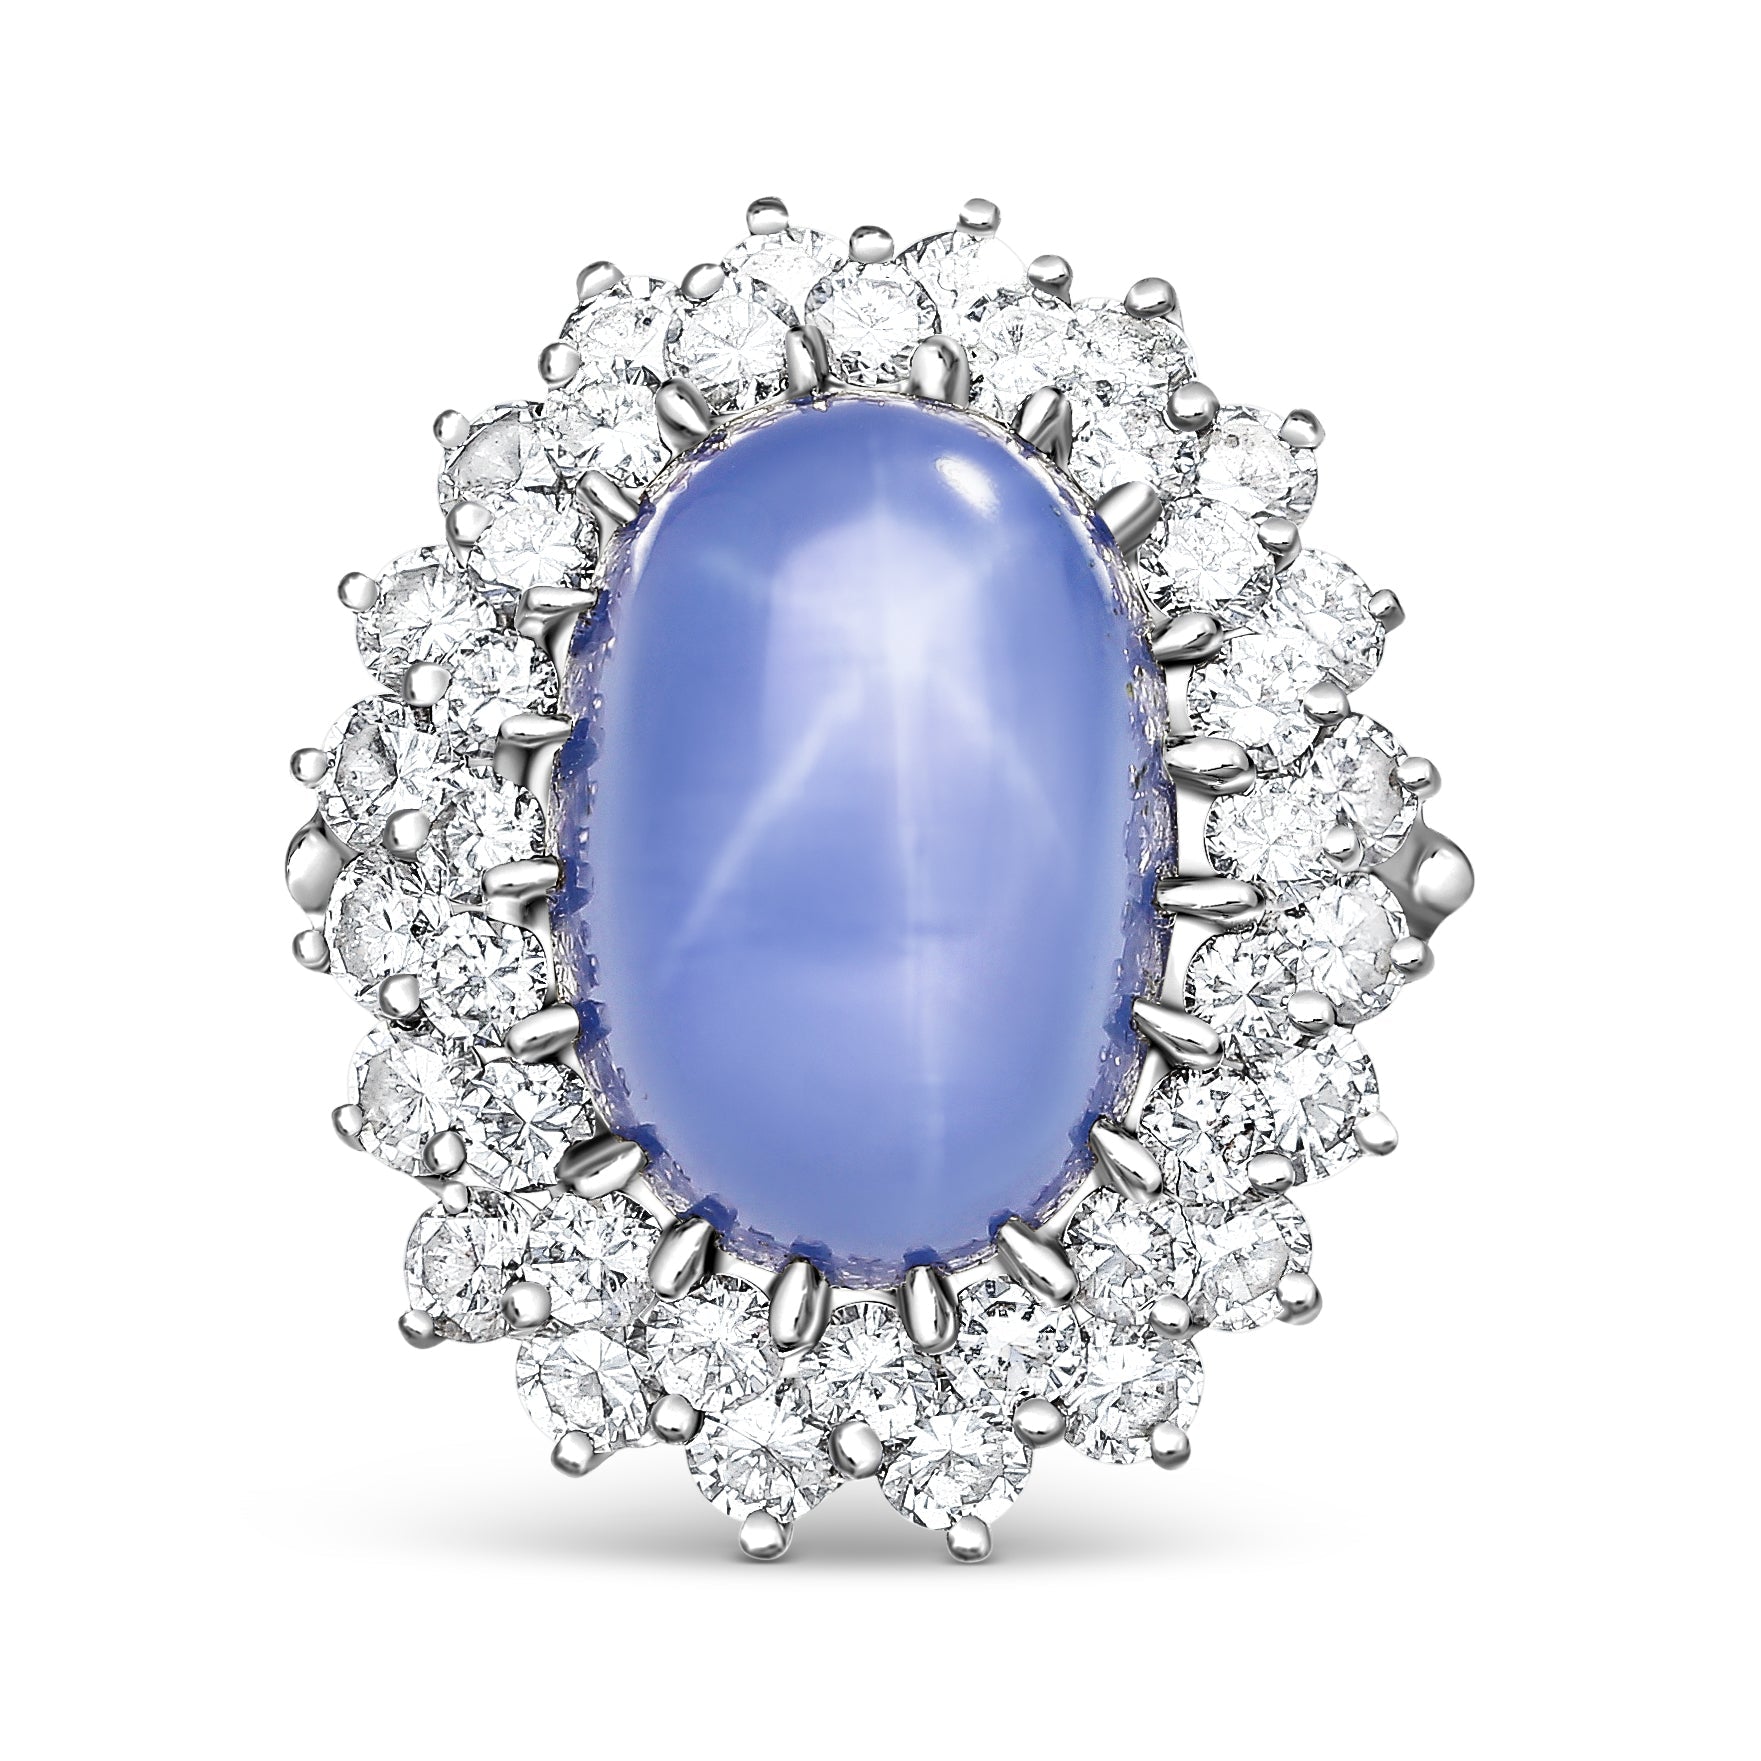 16.30 Carat No Heat Lavender Blue Star-Sapphire in Platinum and 18K Ring